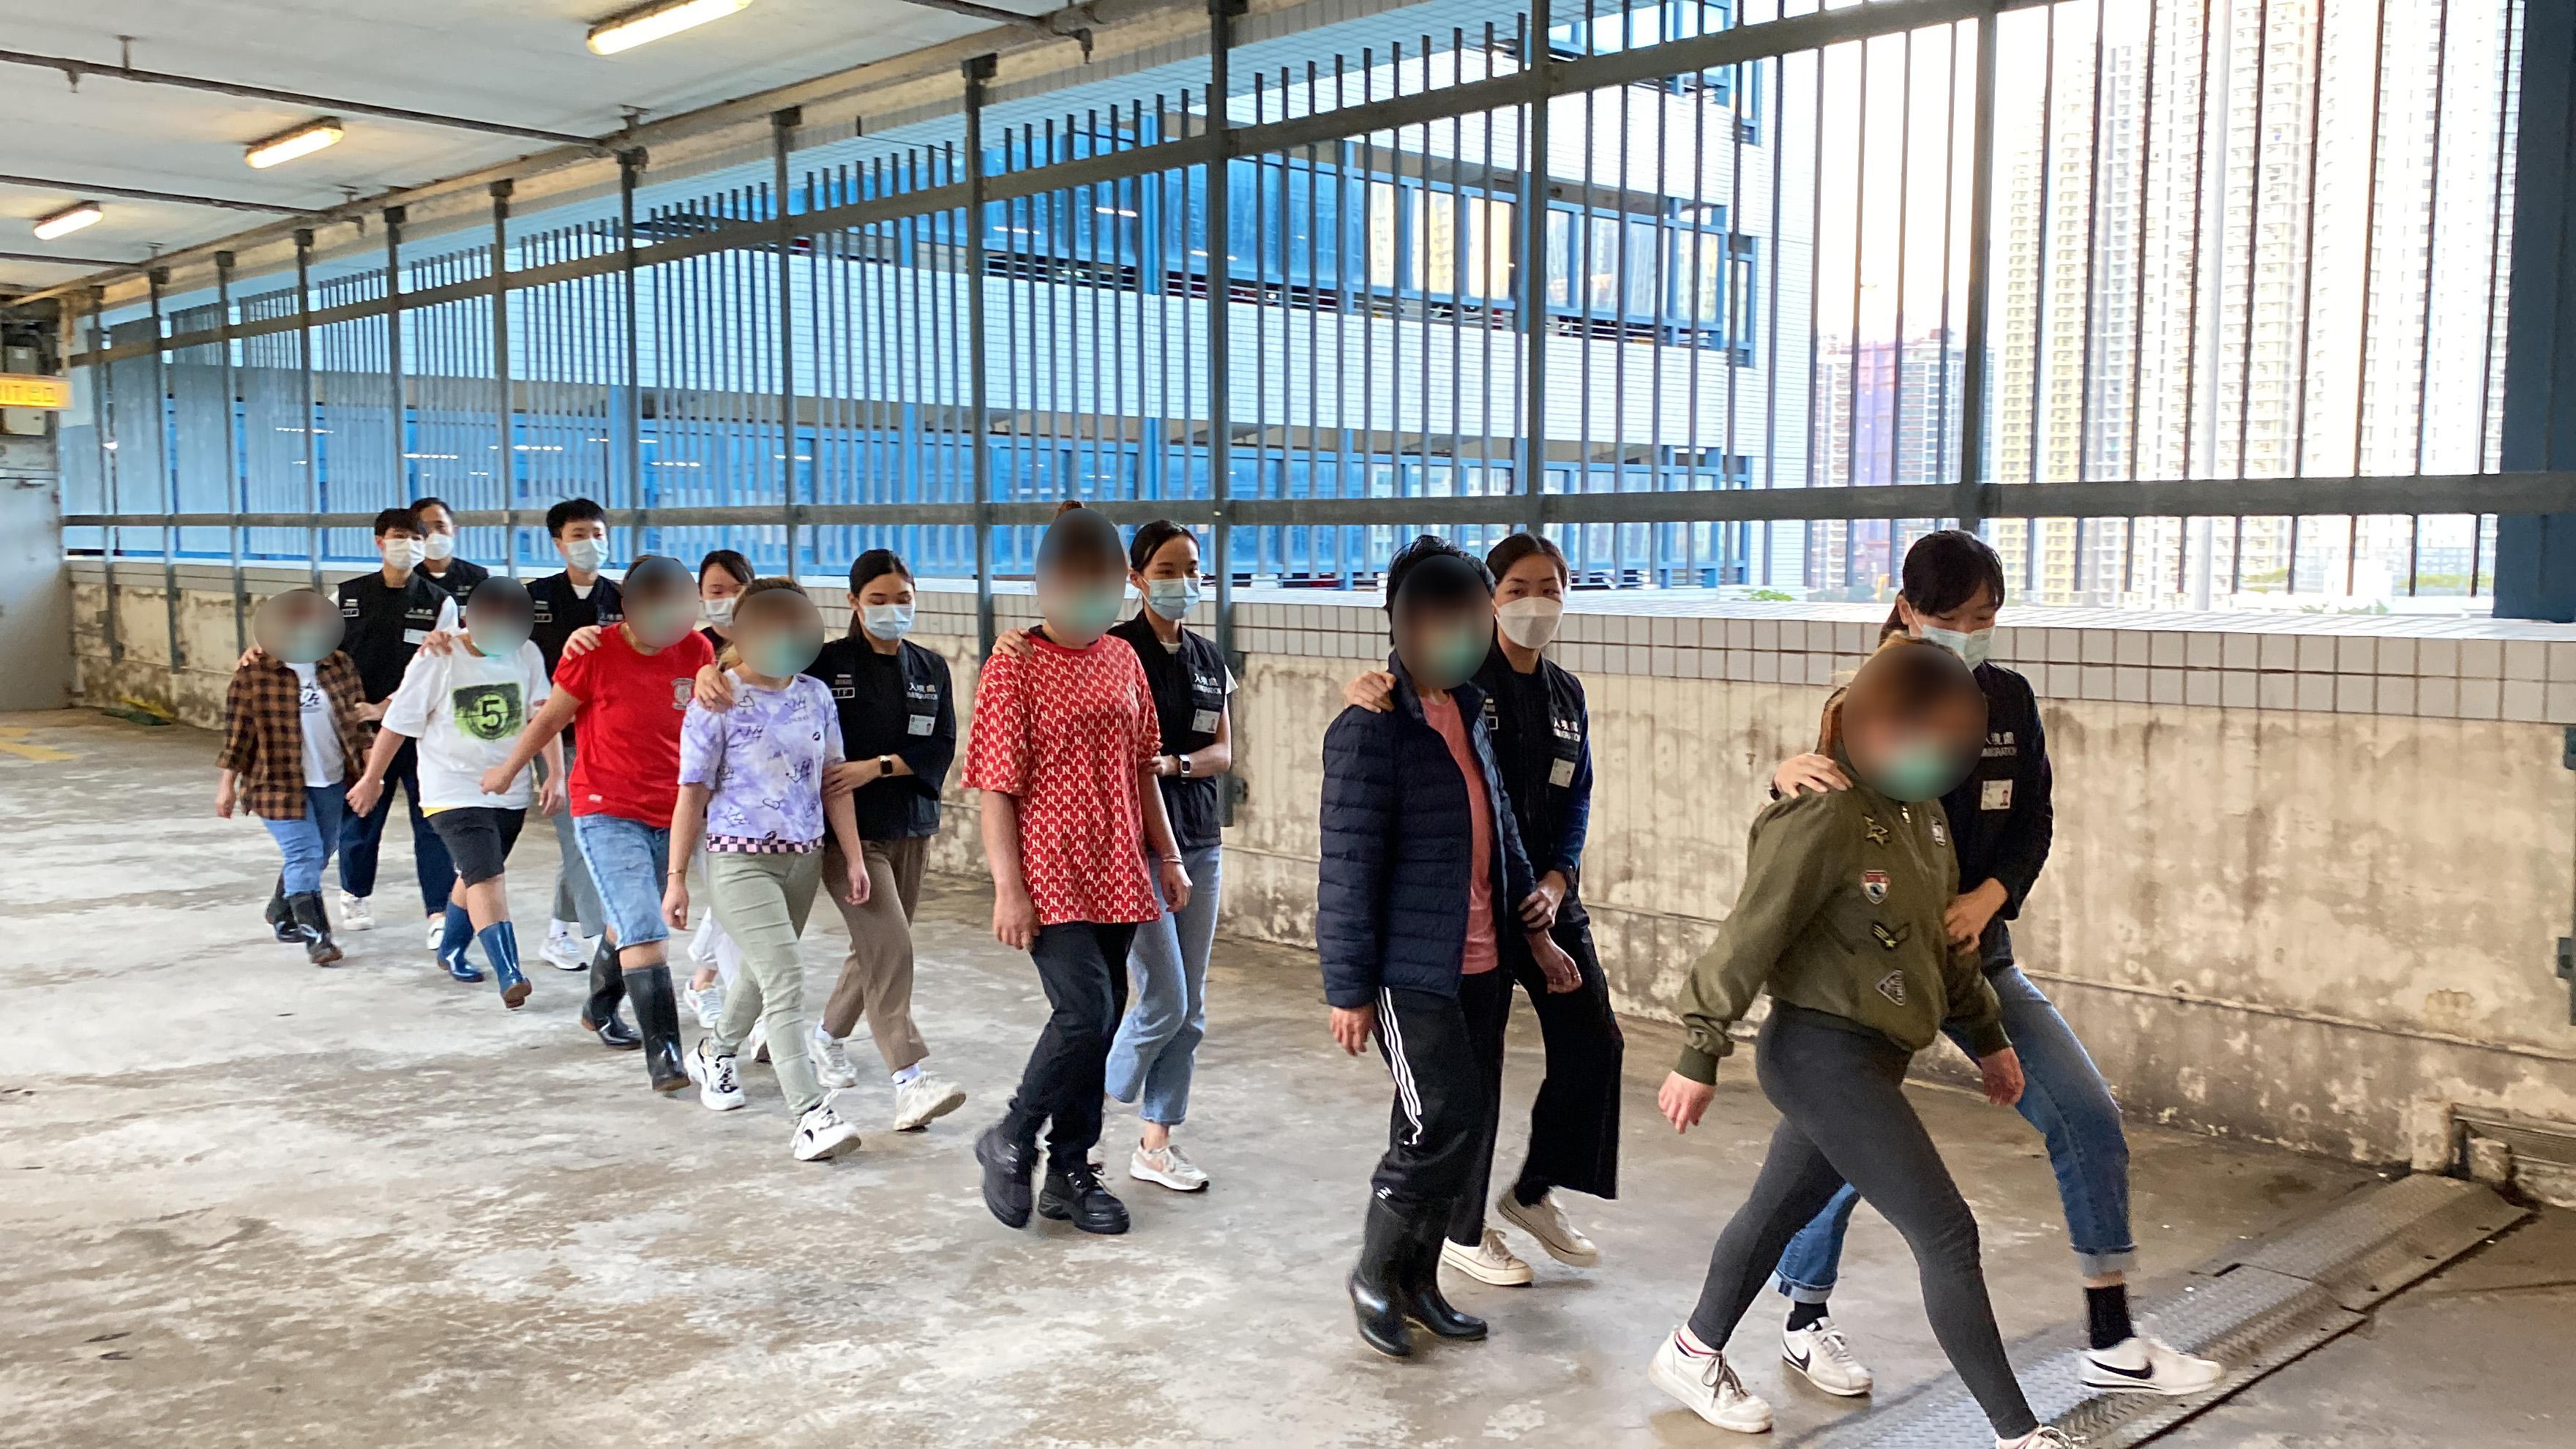 The Immigration Department mounted a series of    territory-wide anti-illegal worker operations codenamed "Breakthrough" and "Twilight" for four consecutive days from November 6 to today (November 9). Photo shows suspected illegal workers arrested during an operation.